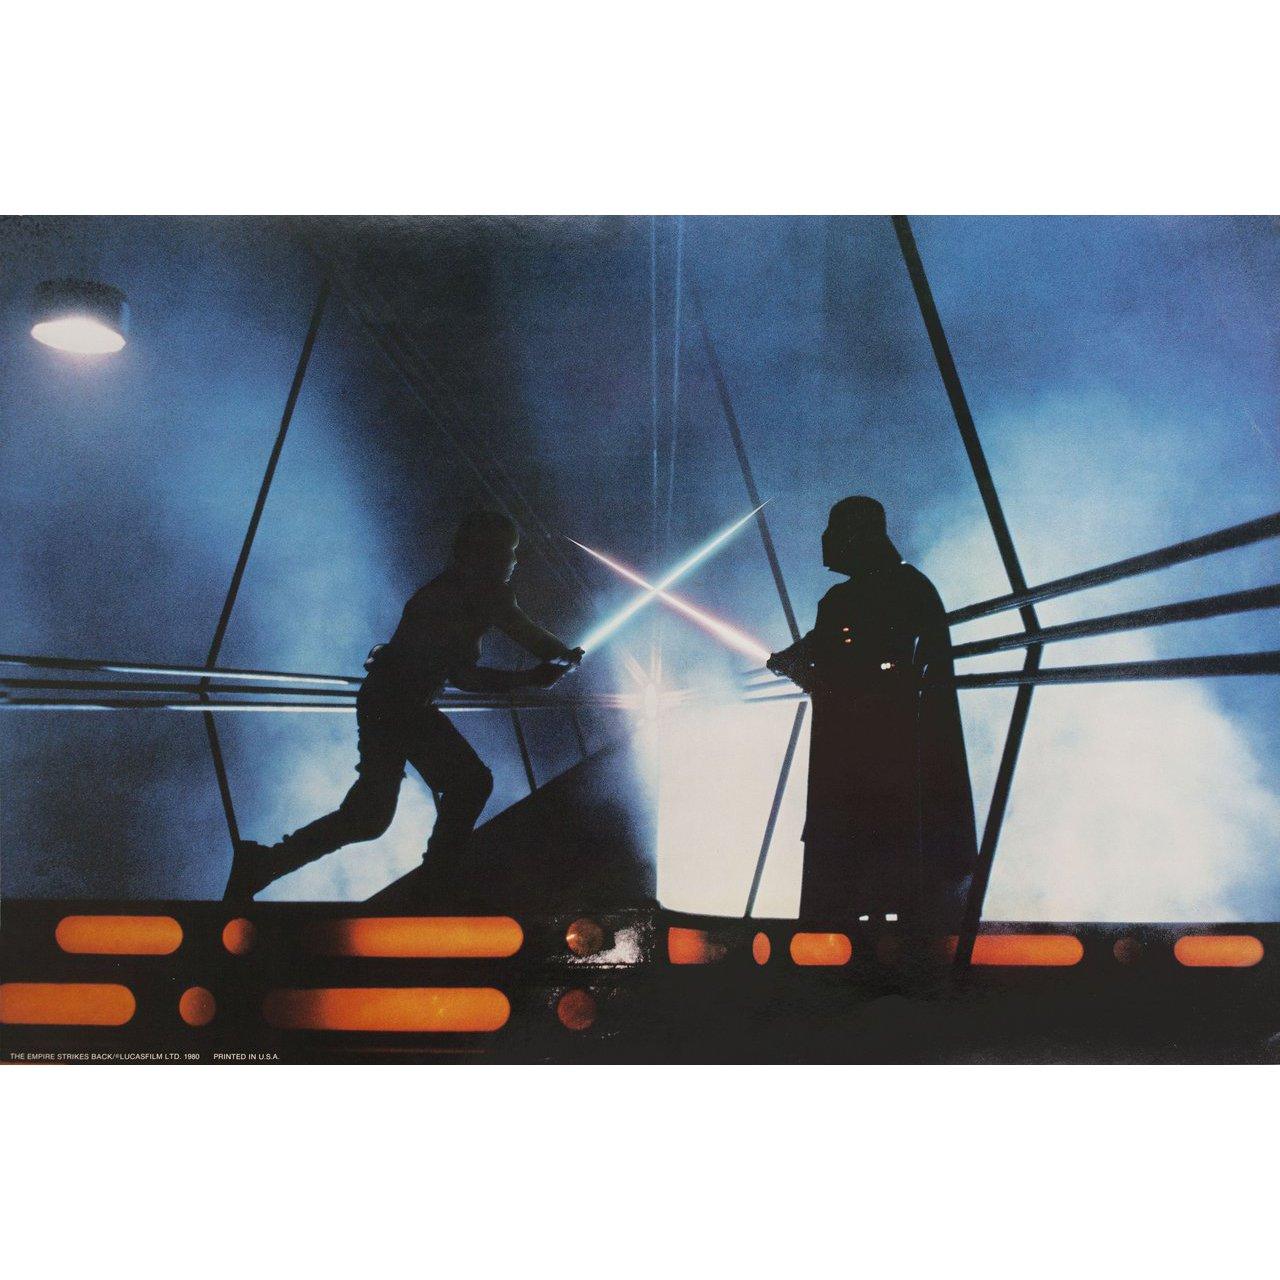 Original 1980 U.S. jumbo color photo for the film The Empire Strikes Back (Star Wars: Episode V) directed by Irvin Kershner with Mark Hamill / Harrison Ford / Carrie Fisher / Billy Dee Williams / Alec Guinness. Very Good-Fine condition, rolled.